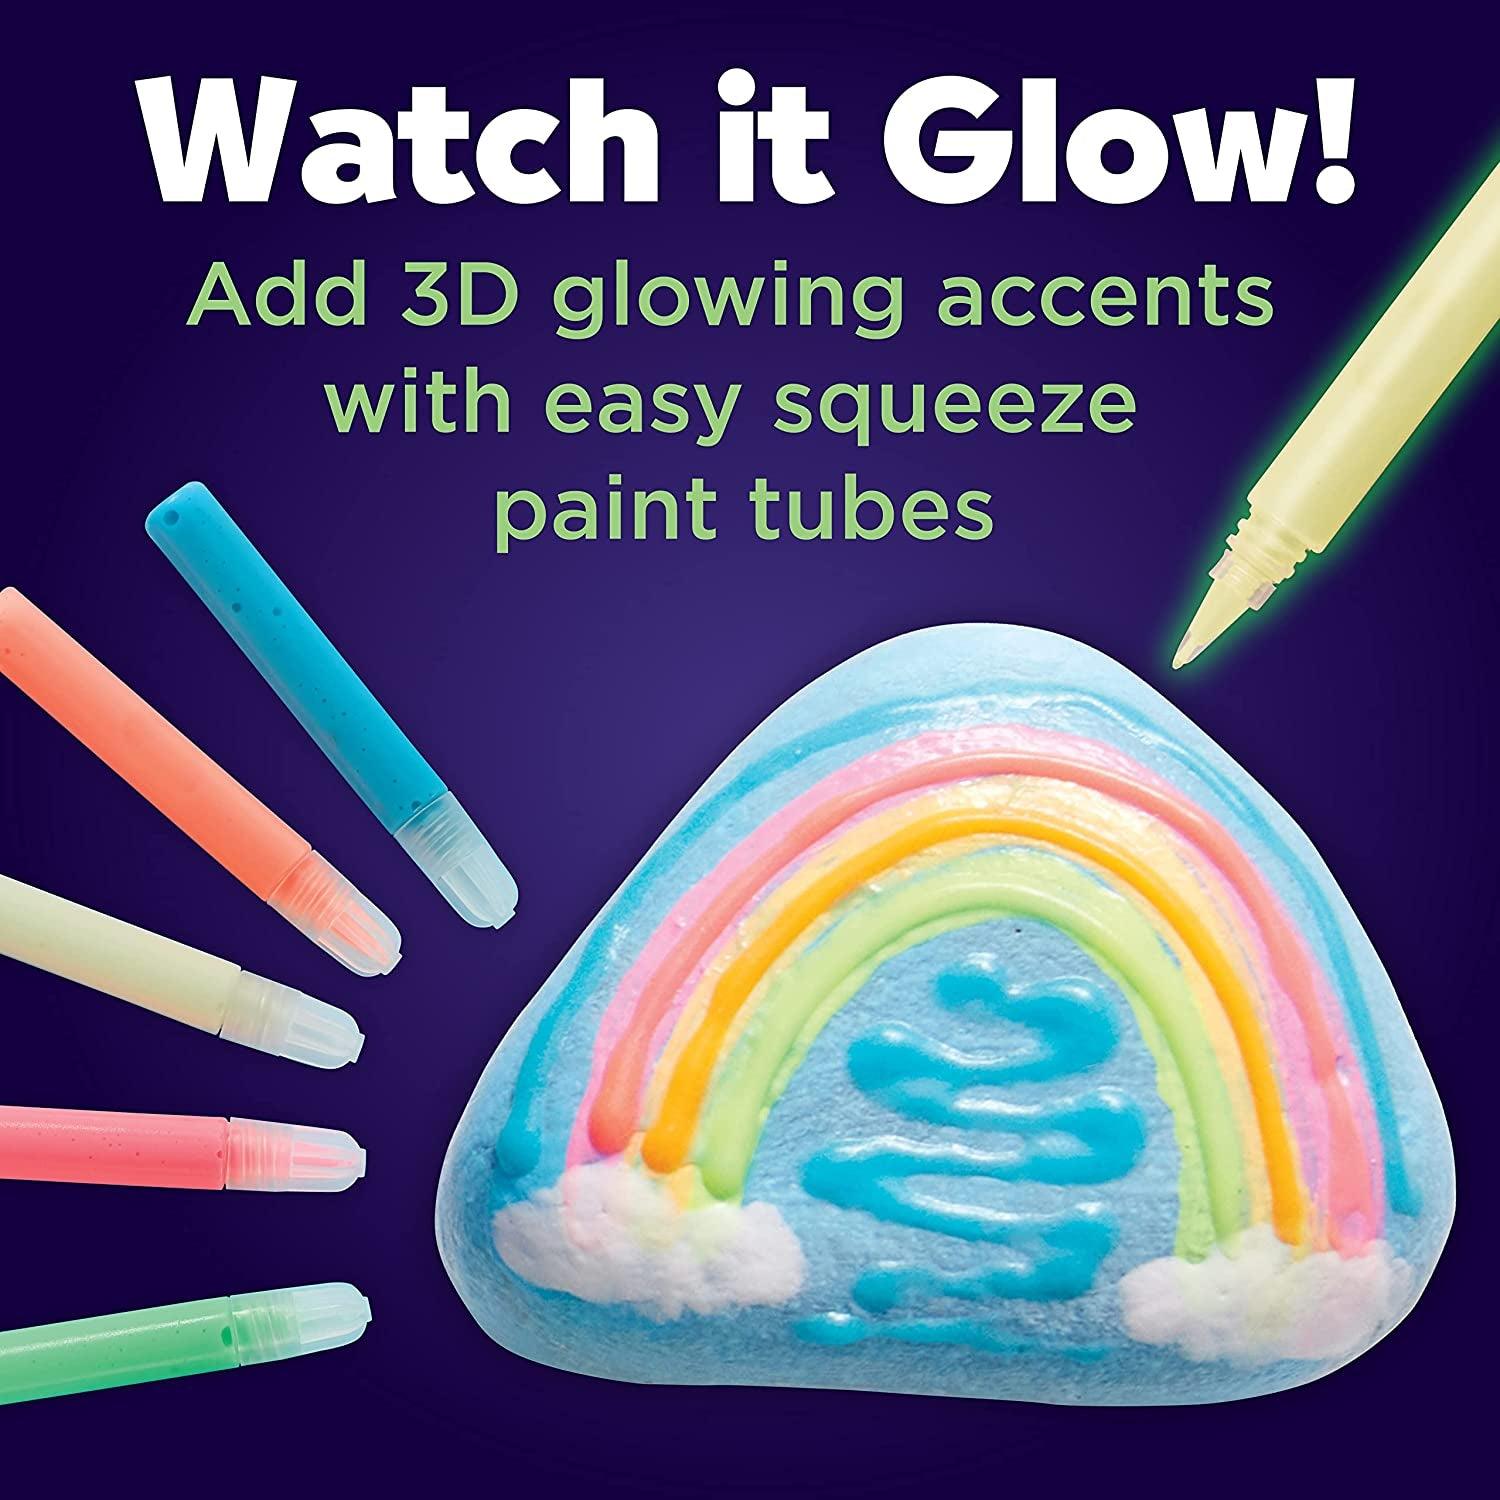 Creativity for Kids Glow in the Dark Rock Painting Kit - Painting Rock –